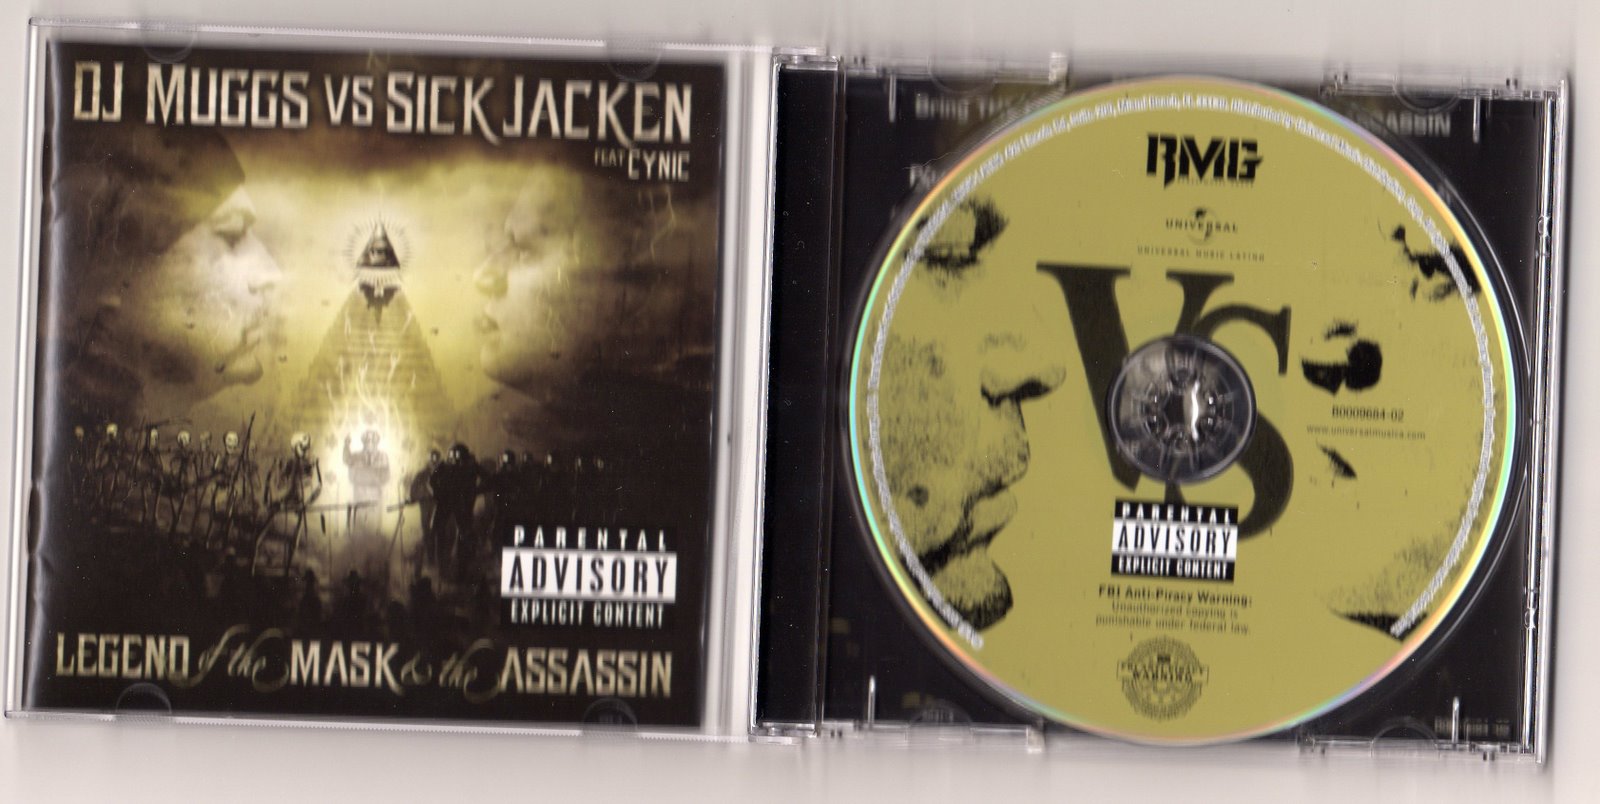 [dj_muggs_vs._sick_jacken-00-legend_of_the_mask_and_the_assassin-front_w_cd-2007-cr.jpg]